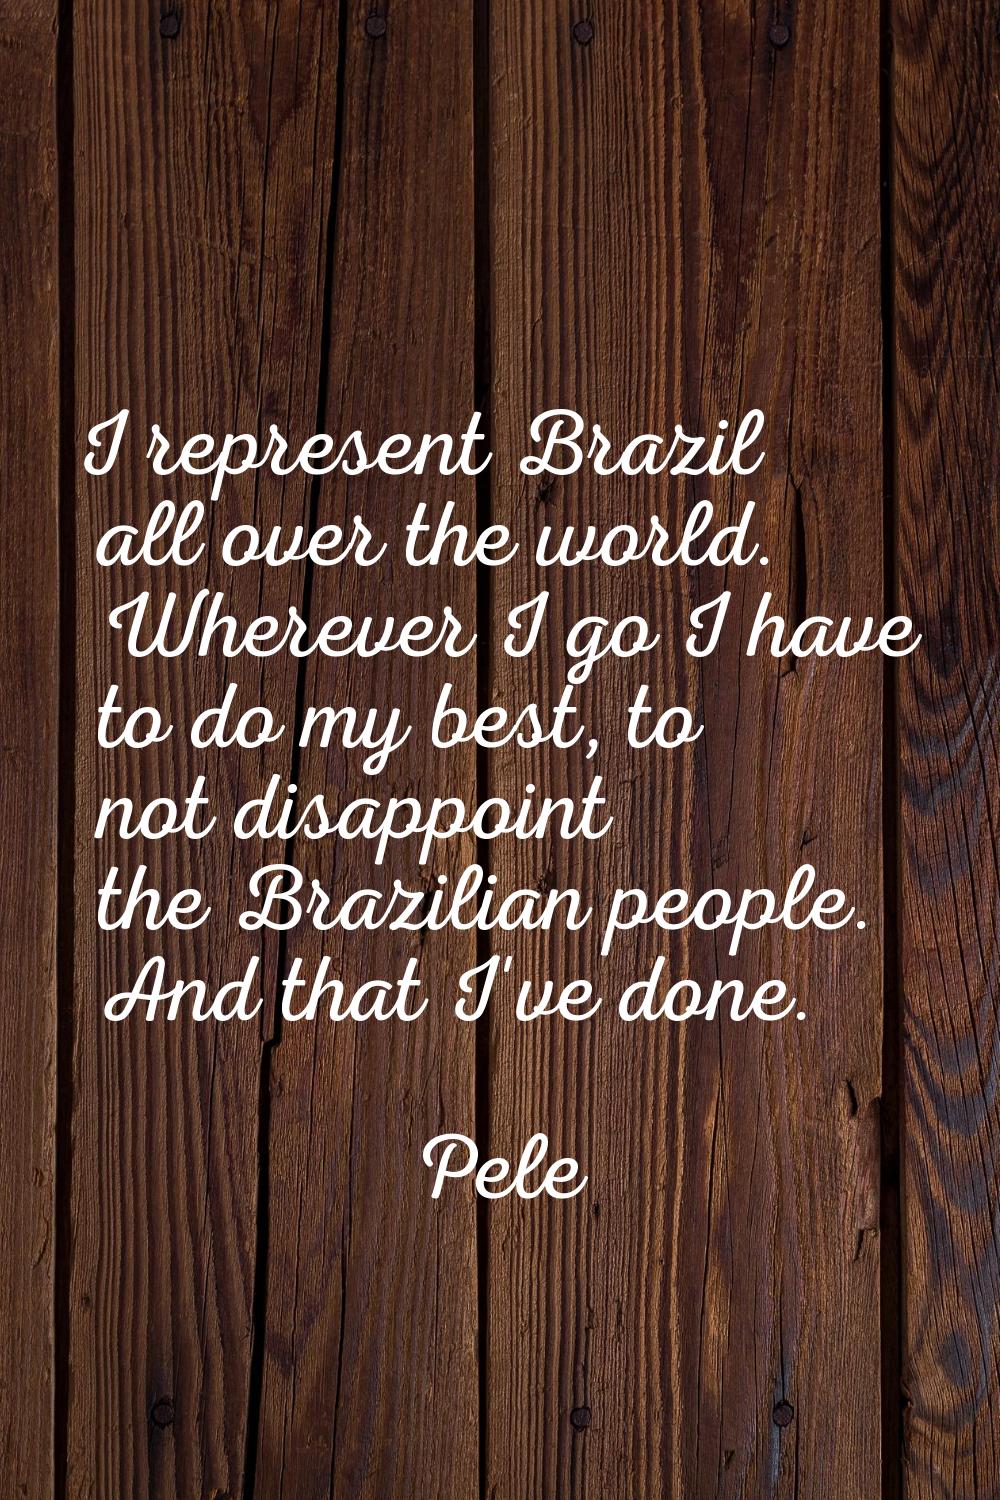 I represent Brazil all over the world. Wherever I go I have to do my best, to not disappoint the Br